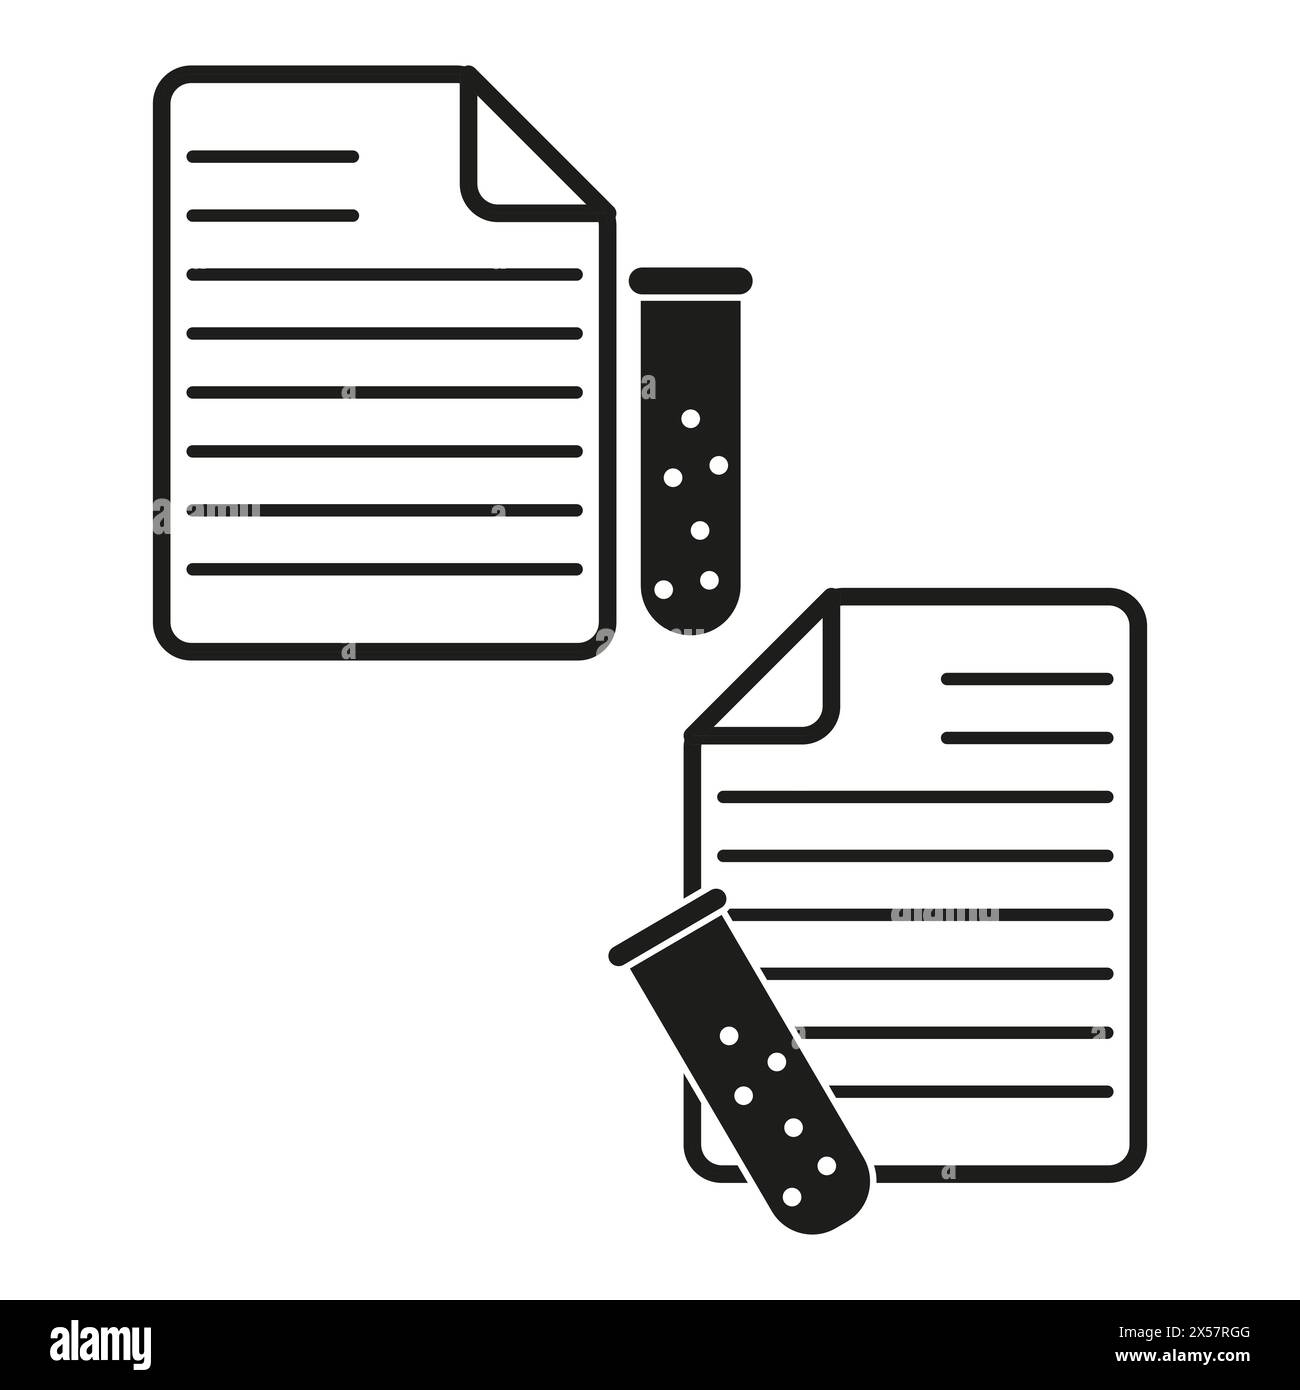 Document and test tube icons vector. Scientific research paperwork symbol. Lab analysis report illustration. Stock Vector